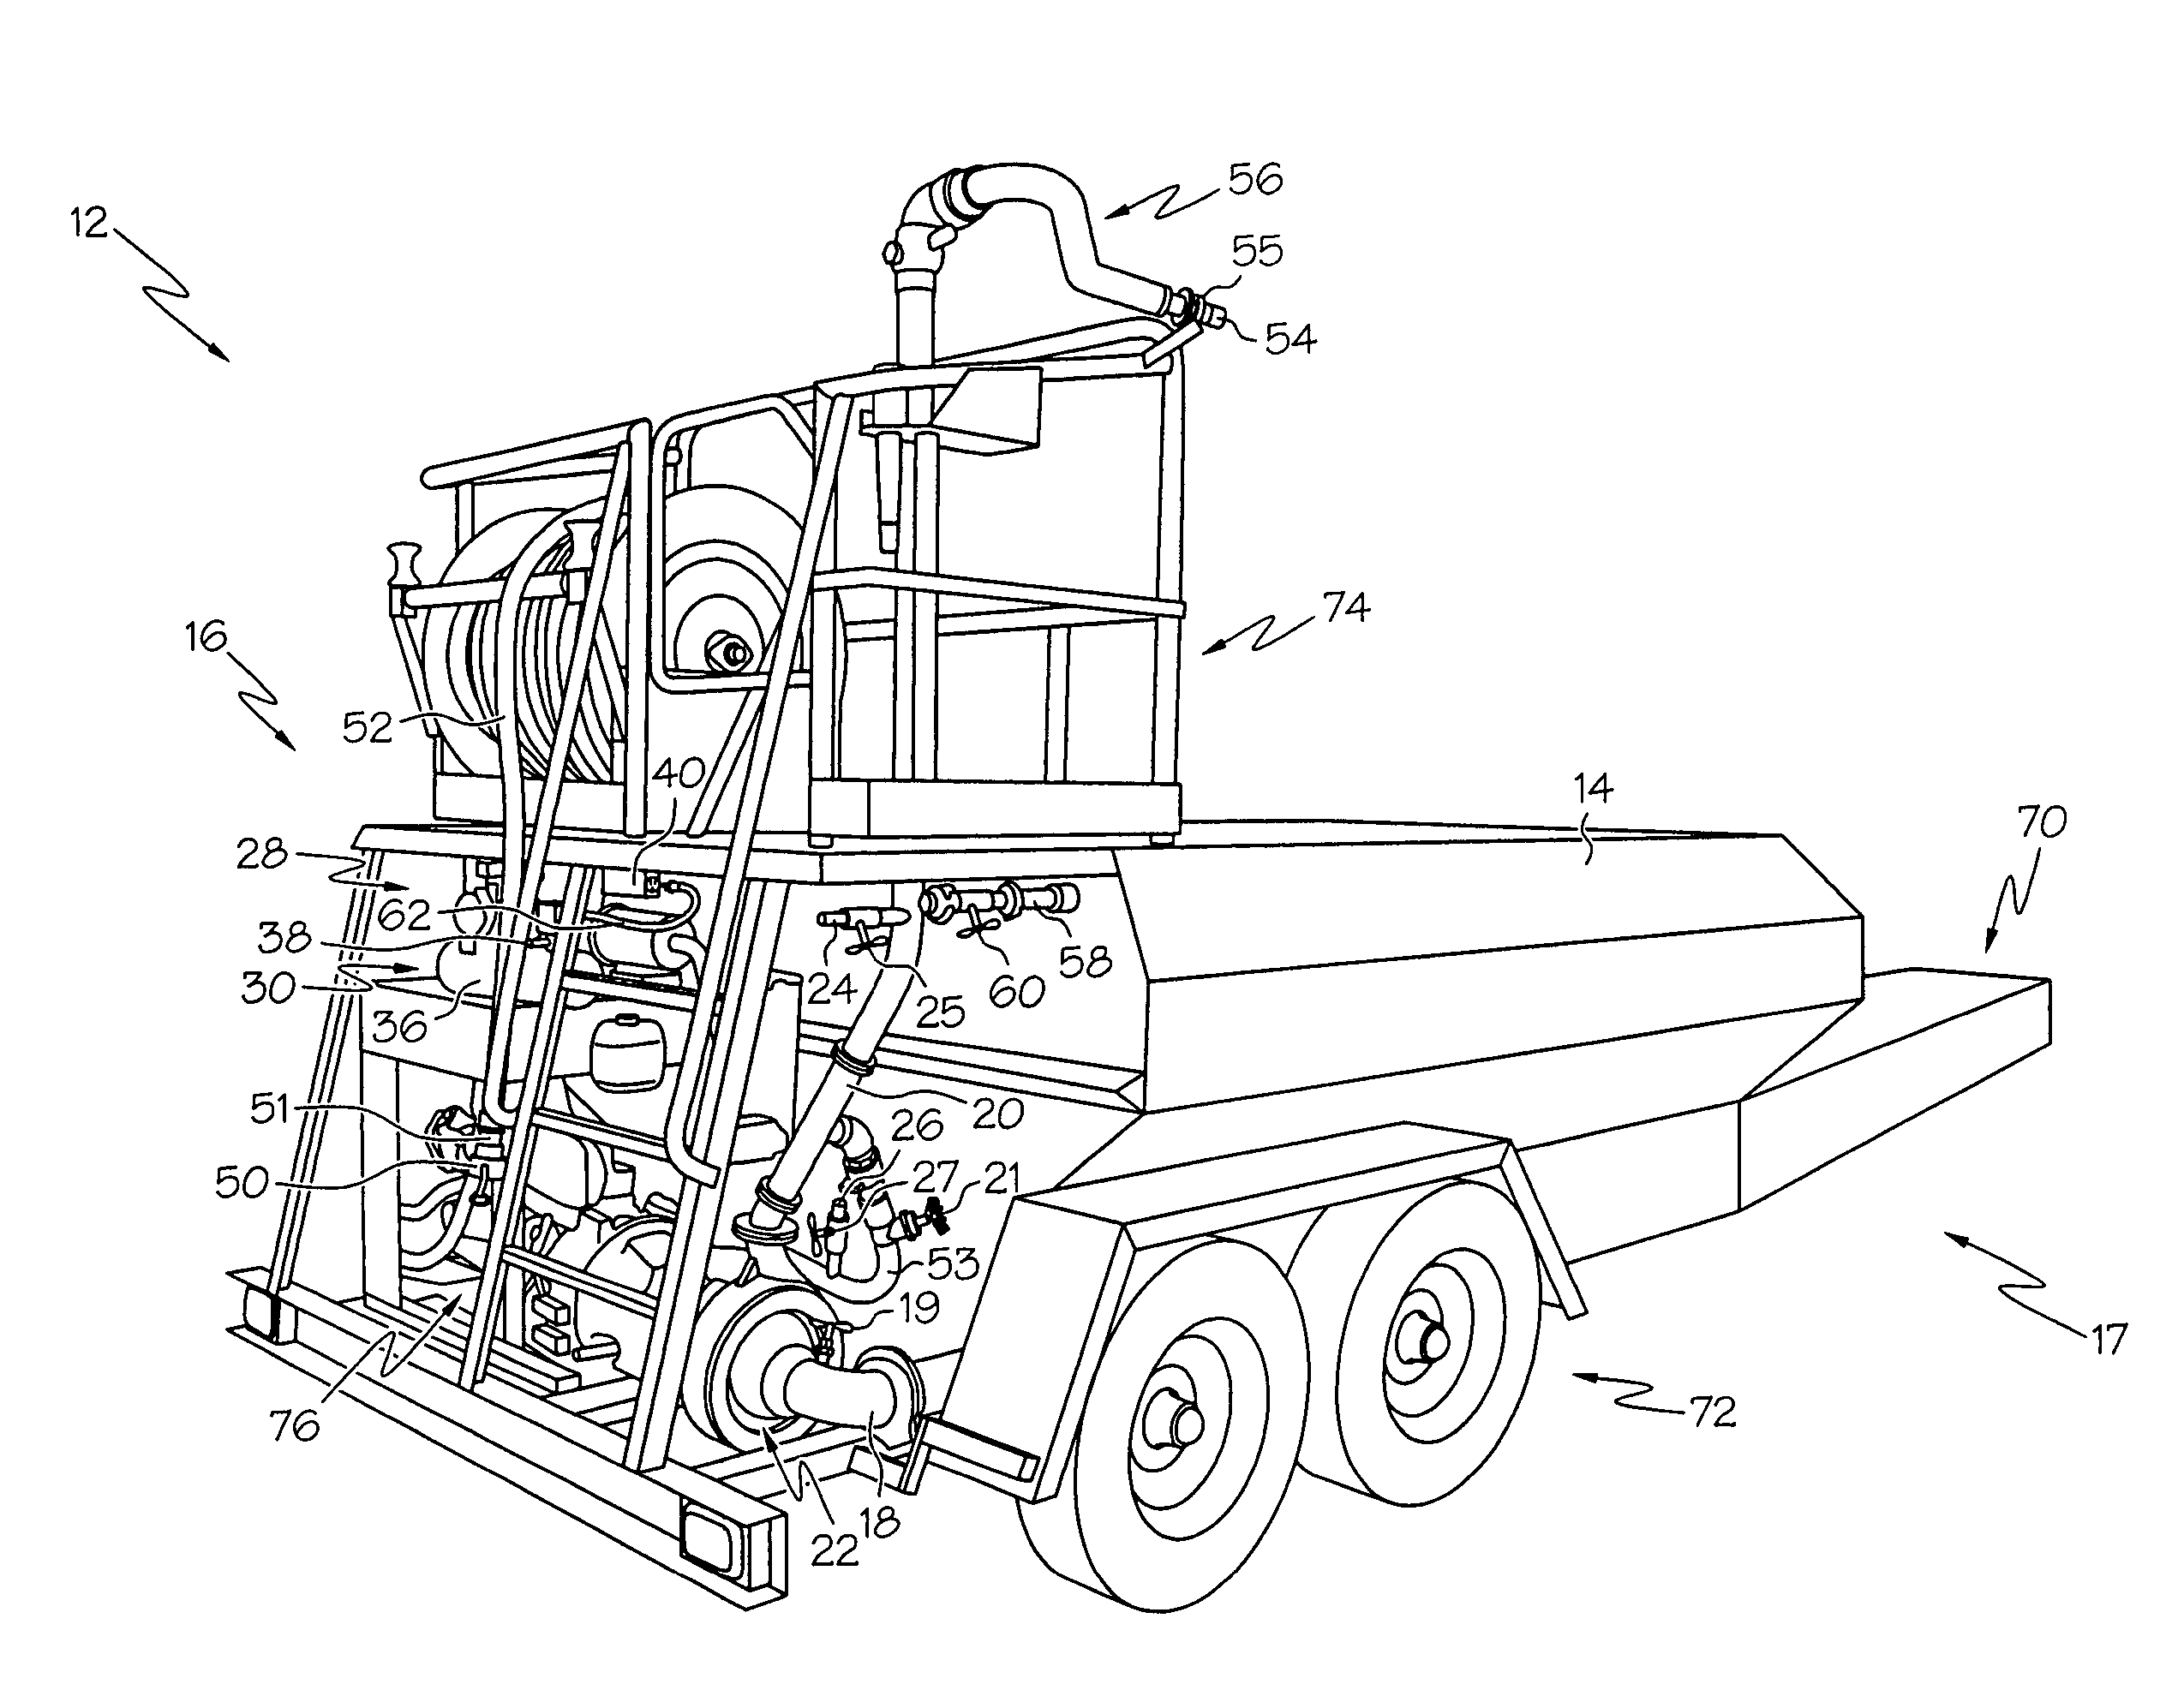 Vehicles and bulk material distribution apparatuses including air flush system and methods